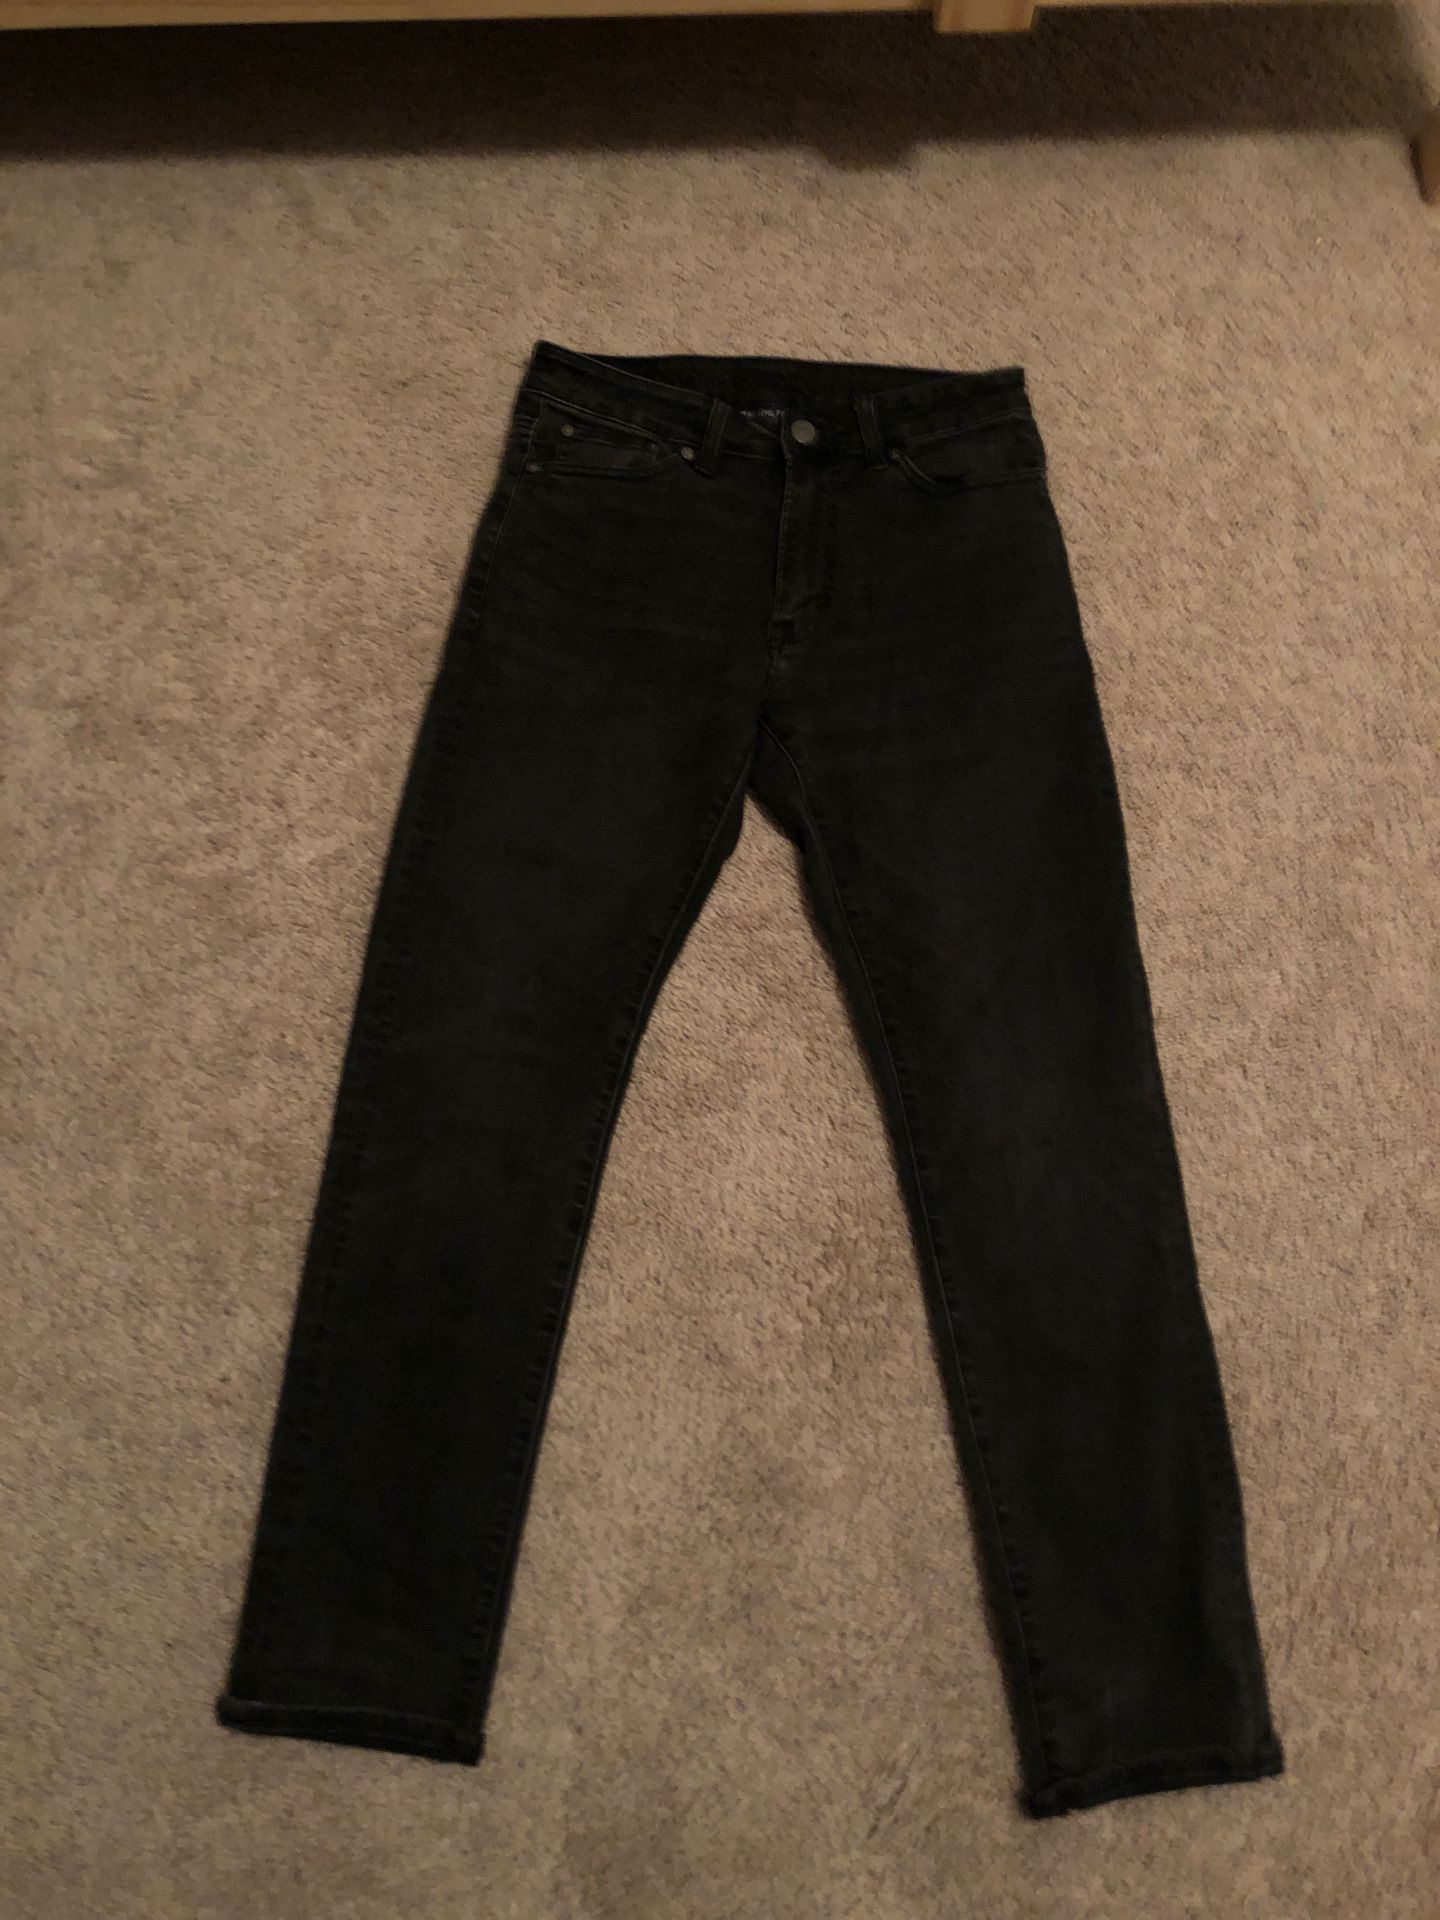 American eagle jeans 29/30